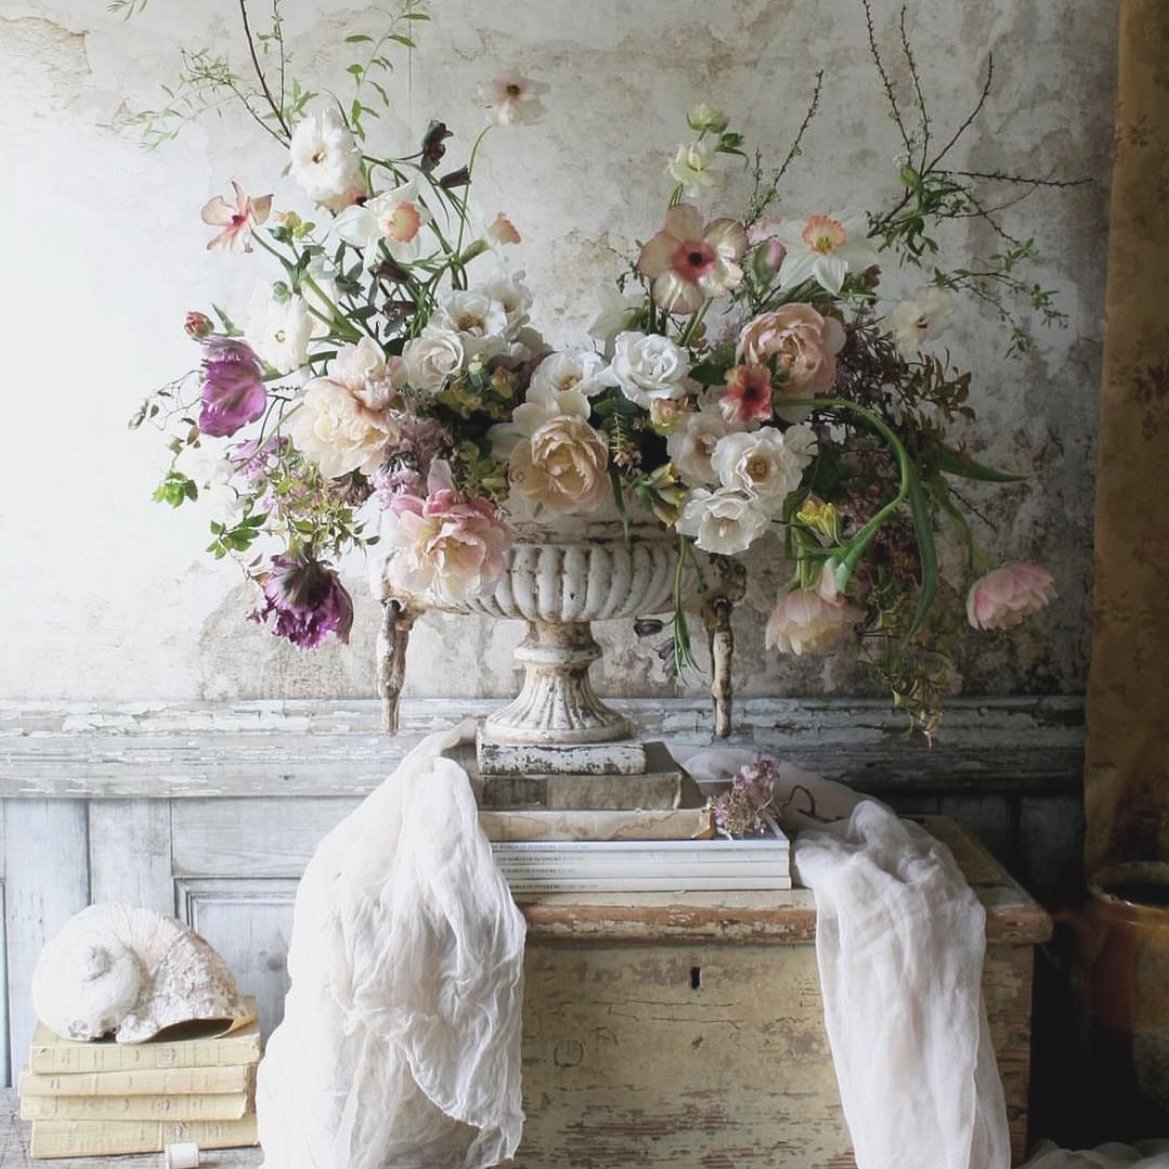 &ldquo;The love of beauty in its multiple forms is the noblest gift of the human cerebrum.&rdquo; ~ Alexis Carrel
photo via @luciehunter 

#luciehunter #love #beauty #home #frissonmaison